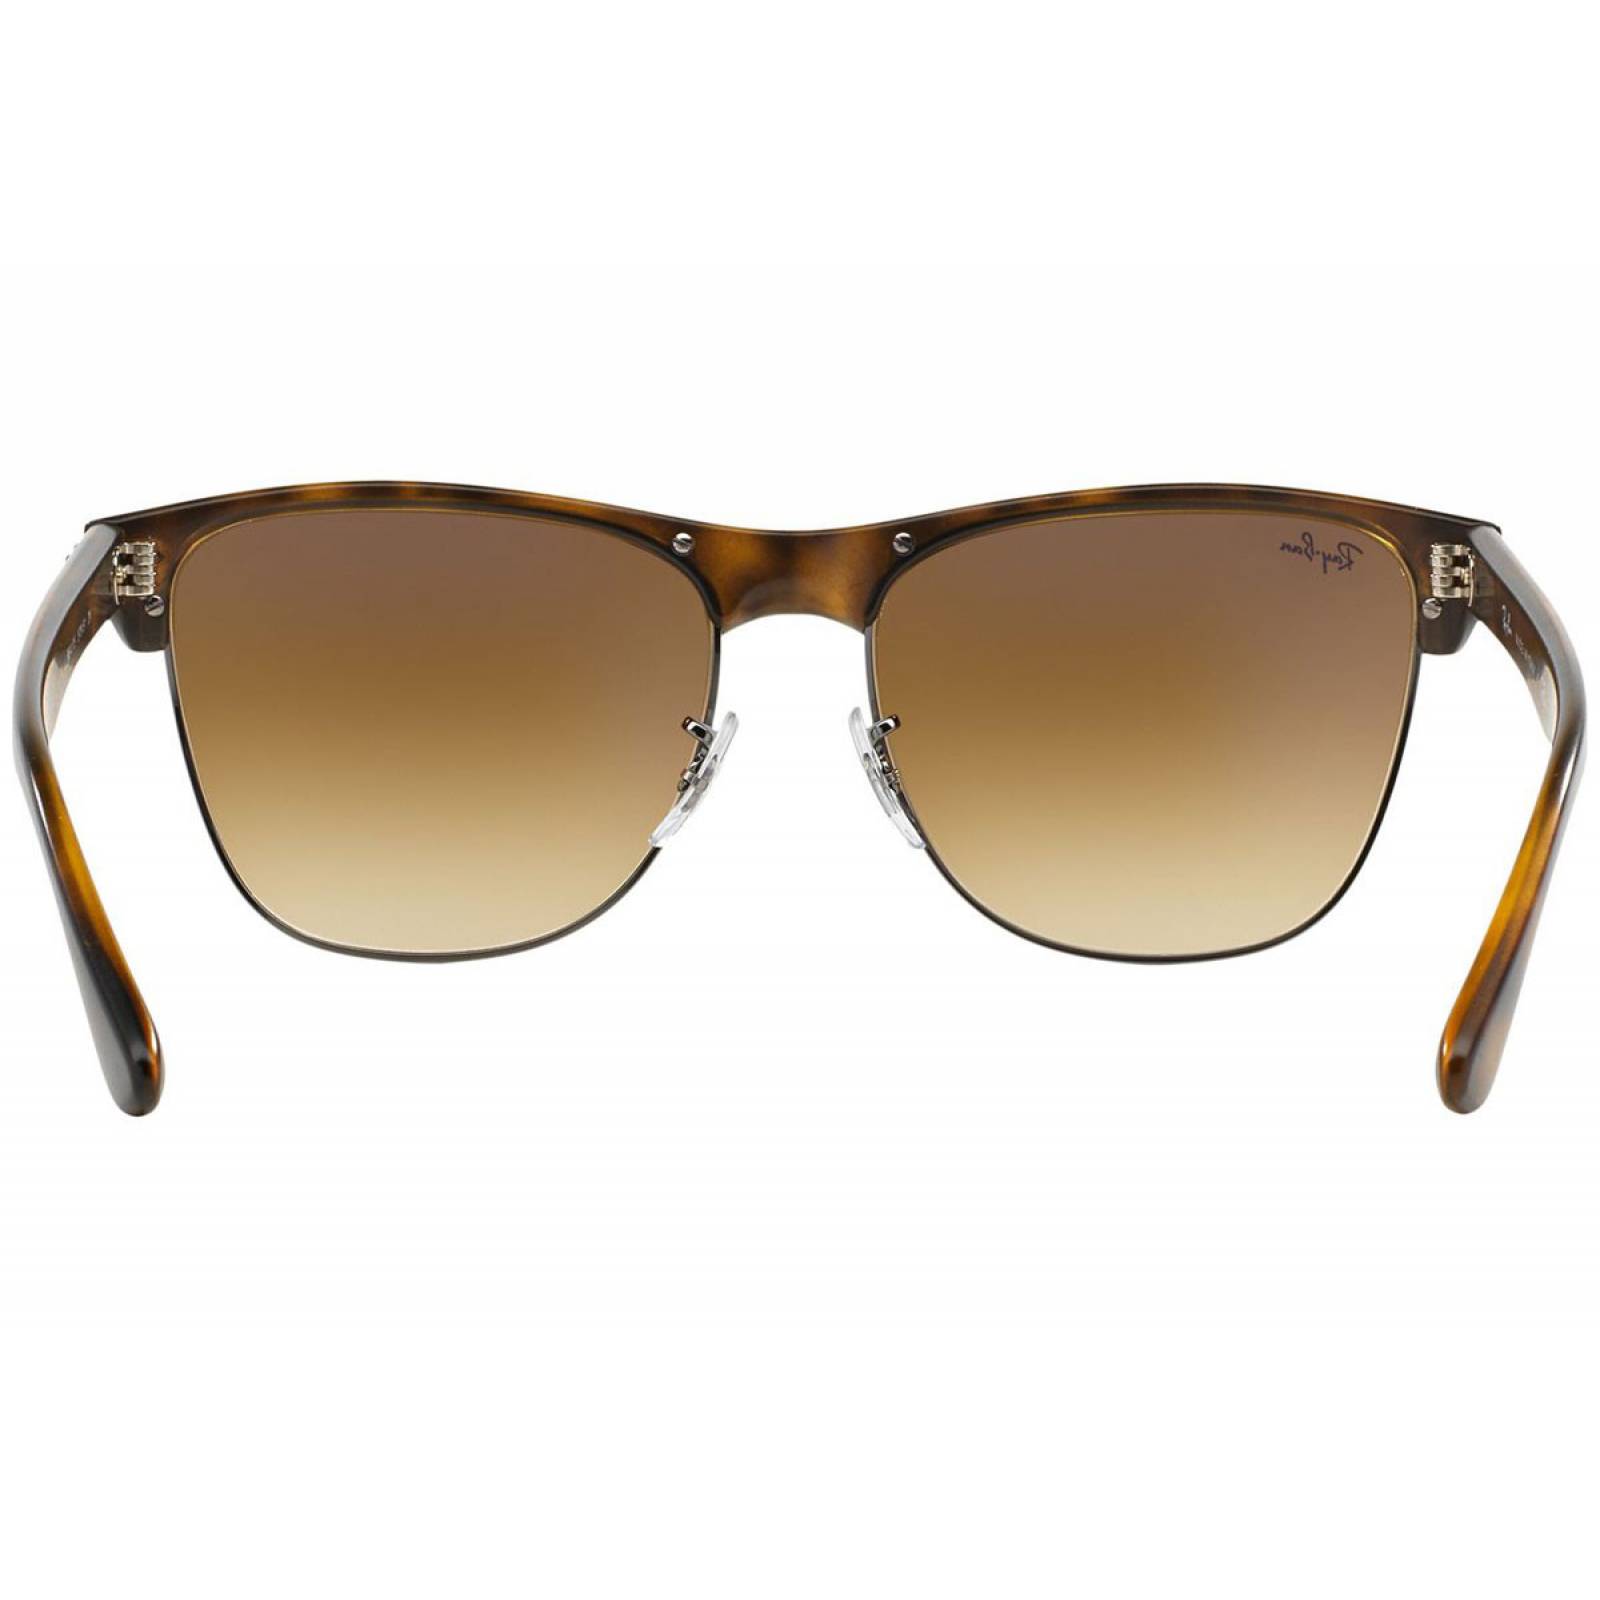 Lentes de sol Ray Ban Clubmaster Oversized RB4175 878/51 57MM Unisex